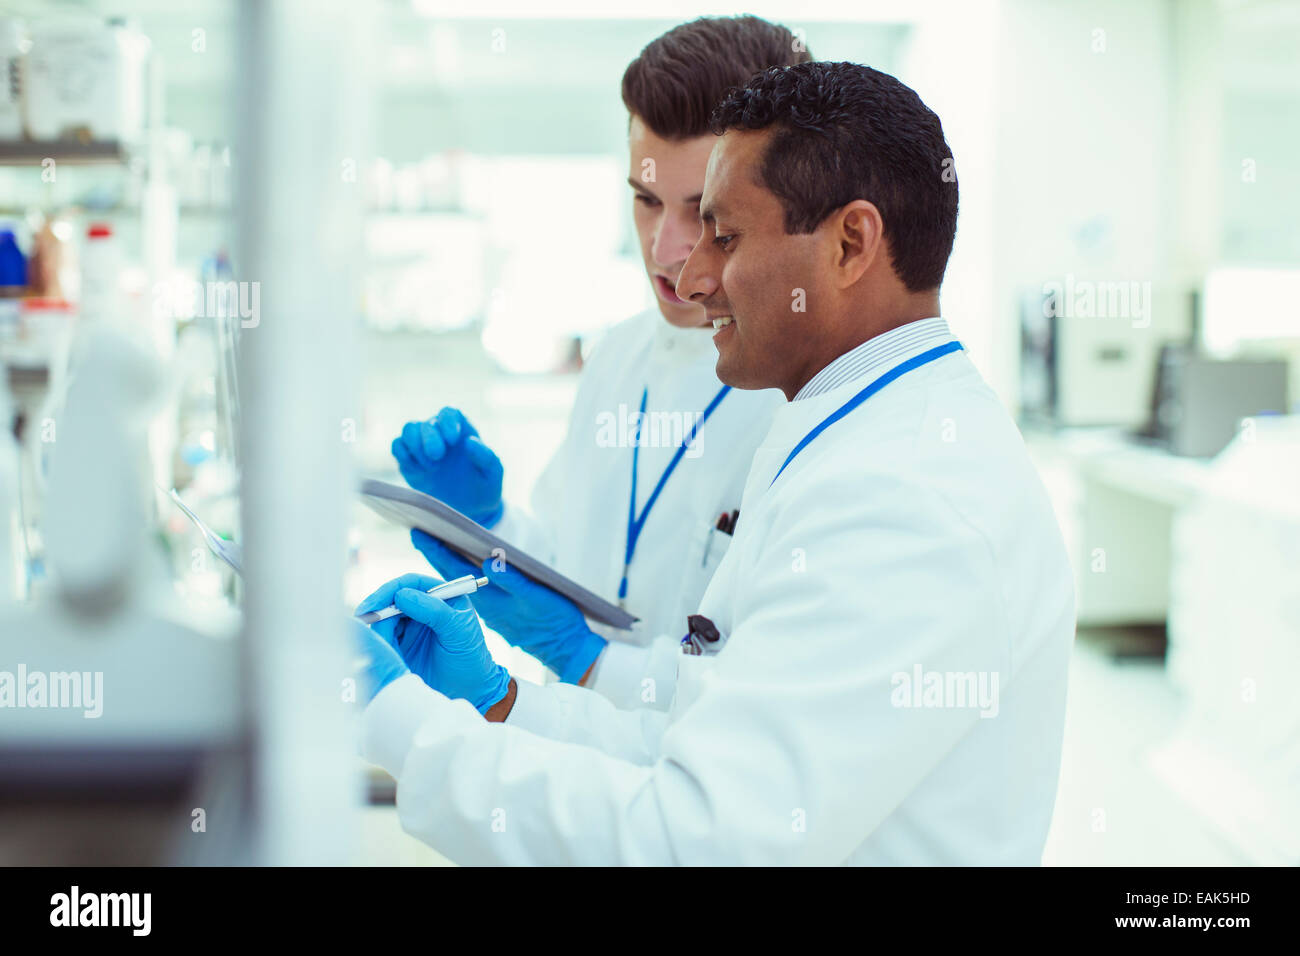 Scientists using digital tablet in laboratory Stock Photo